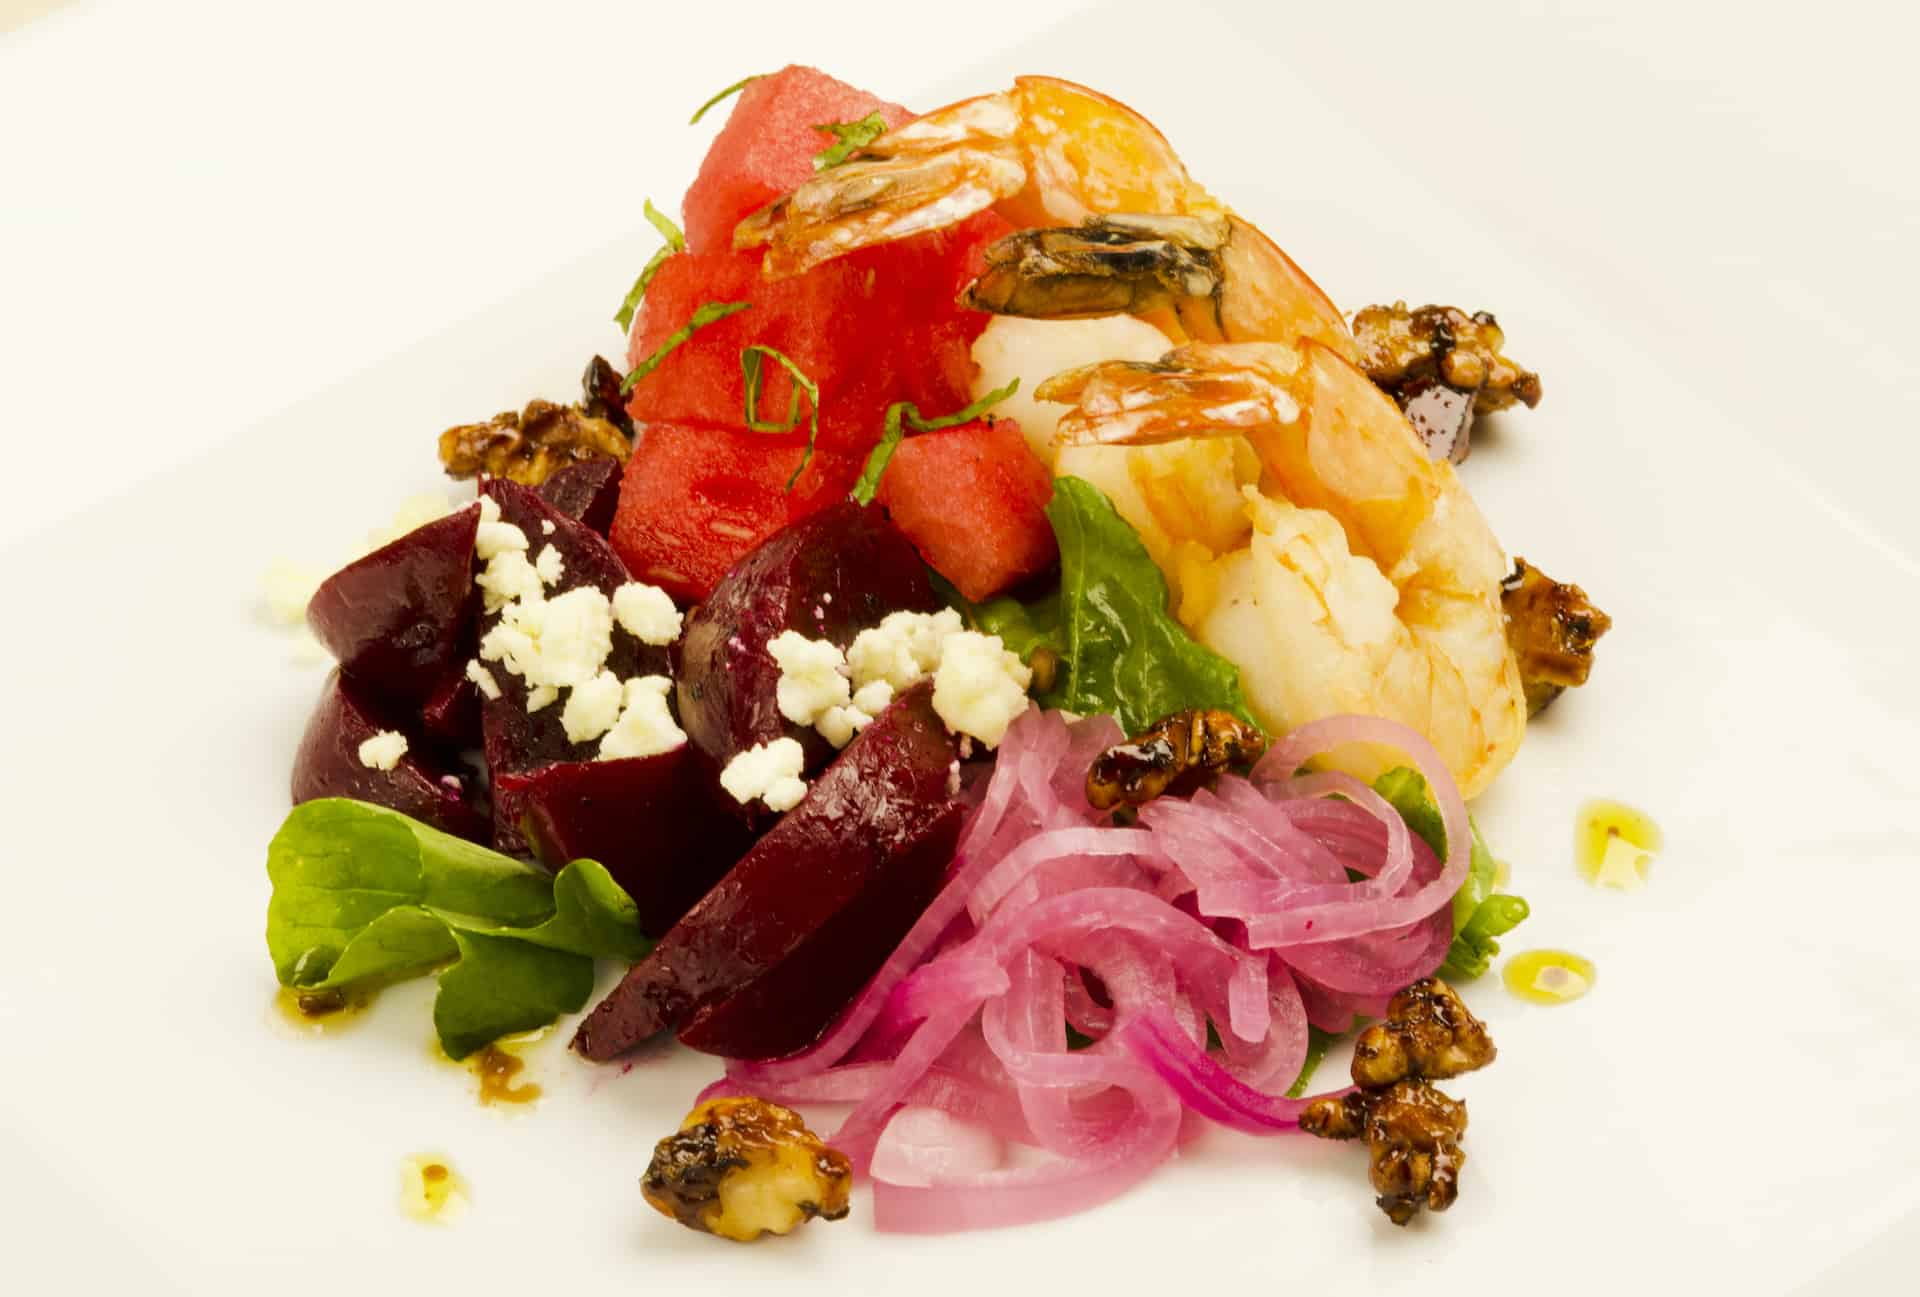 Beet, Watermelon, and Arugula Salad with Caramelized Pecans, Feta, and Shrimp